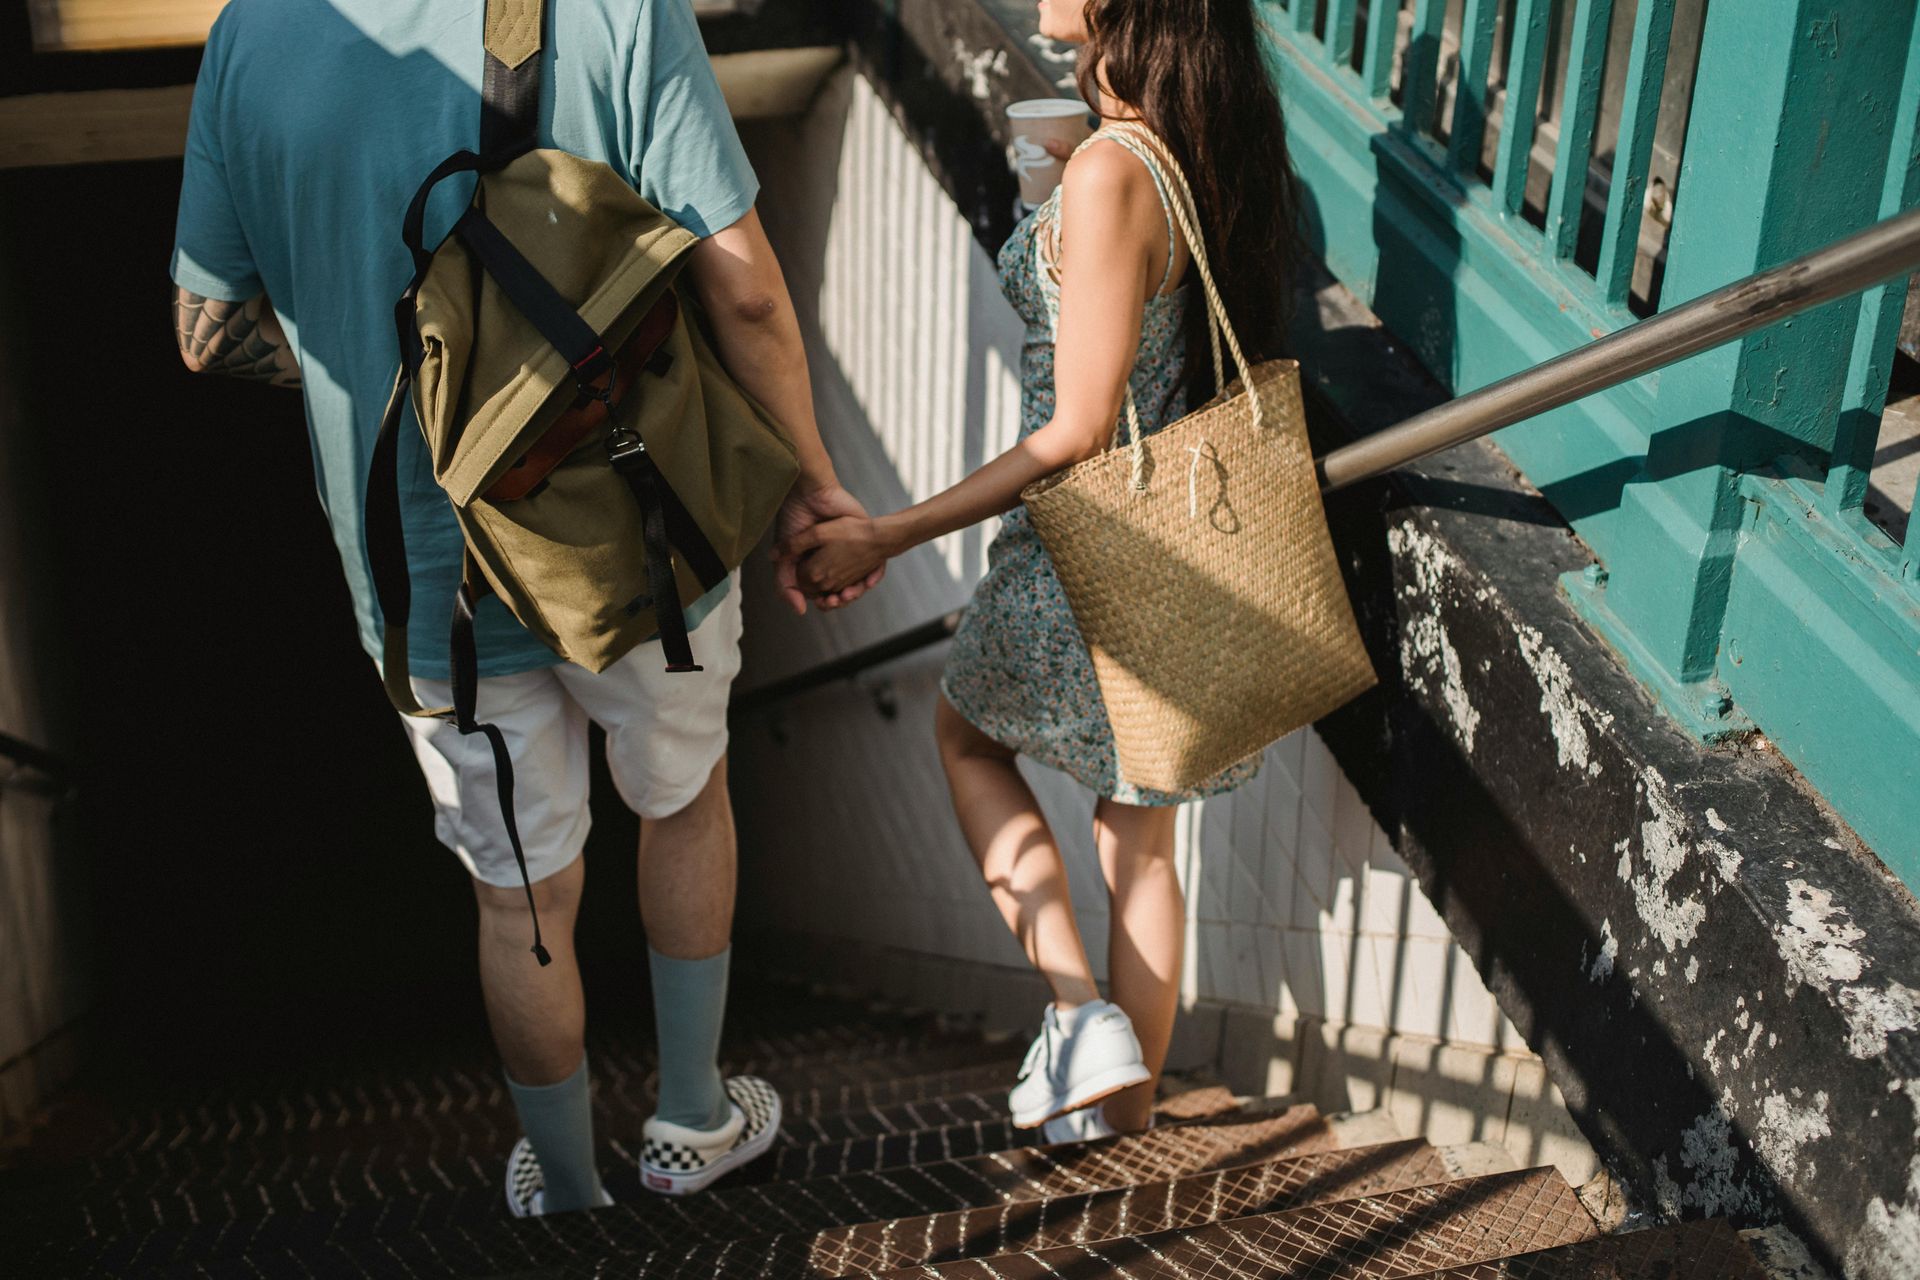 A couple holding hands while walking up stairs, showing a symbol of togetherness.